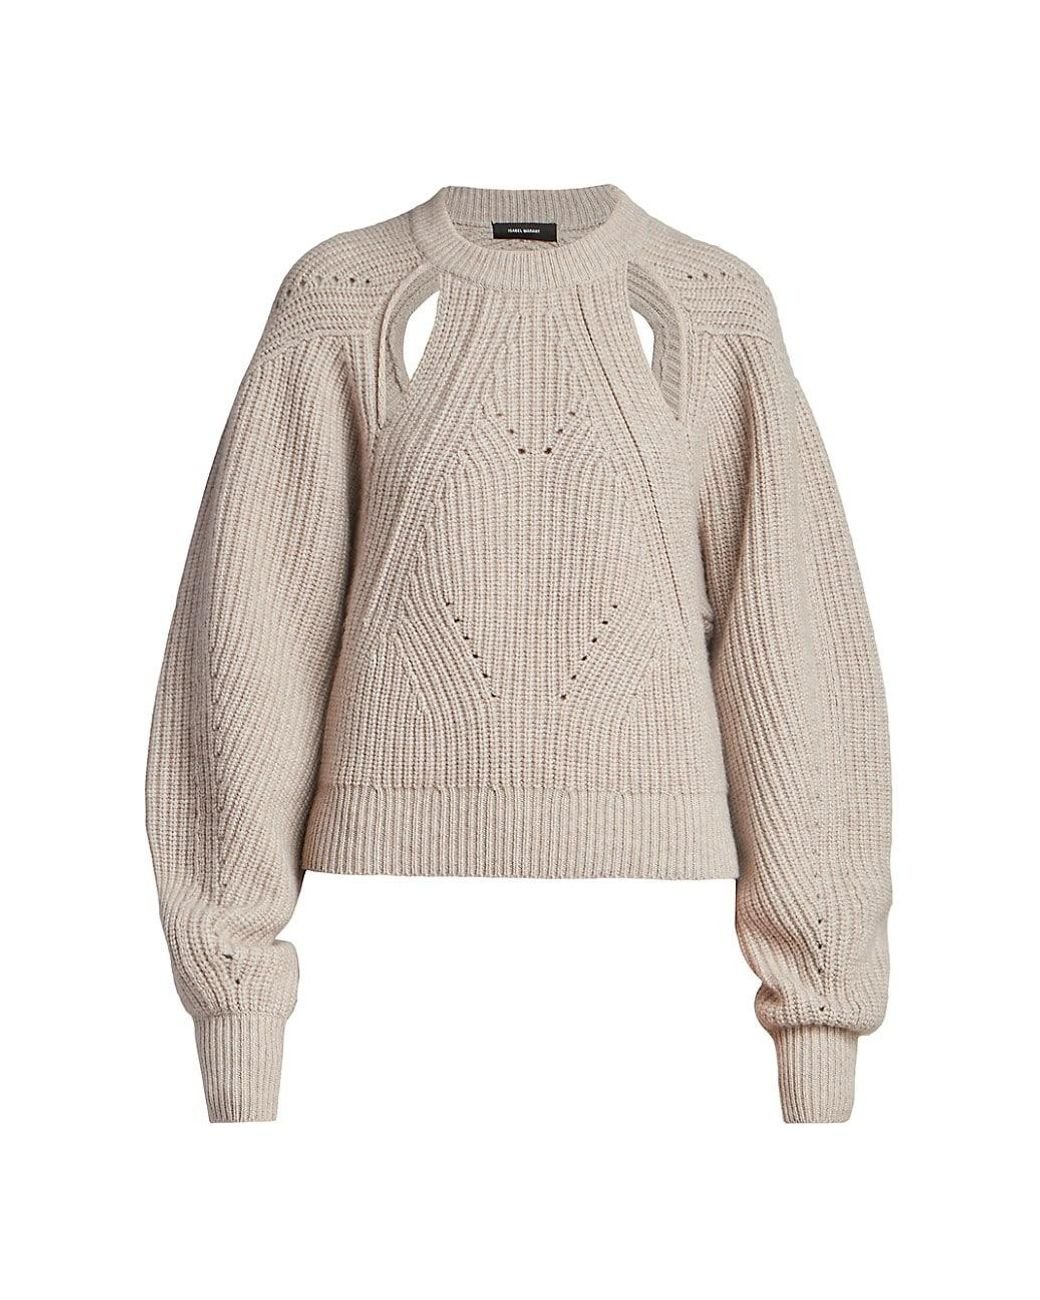 Isabel Marant Palma Wool & Cashmere Knit Cut-out Sweater in Beige ...